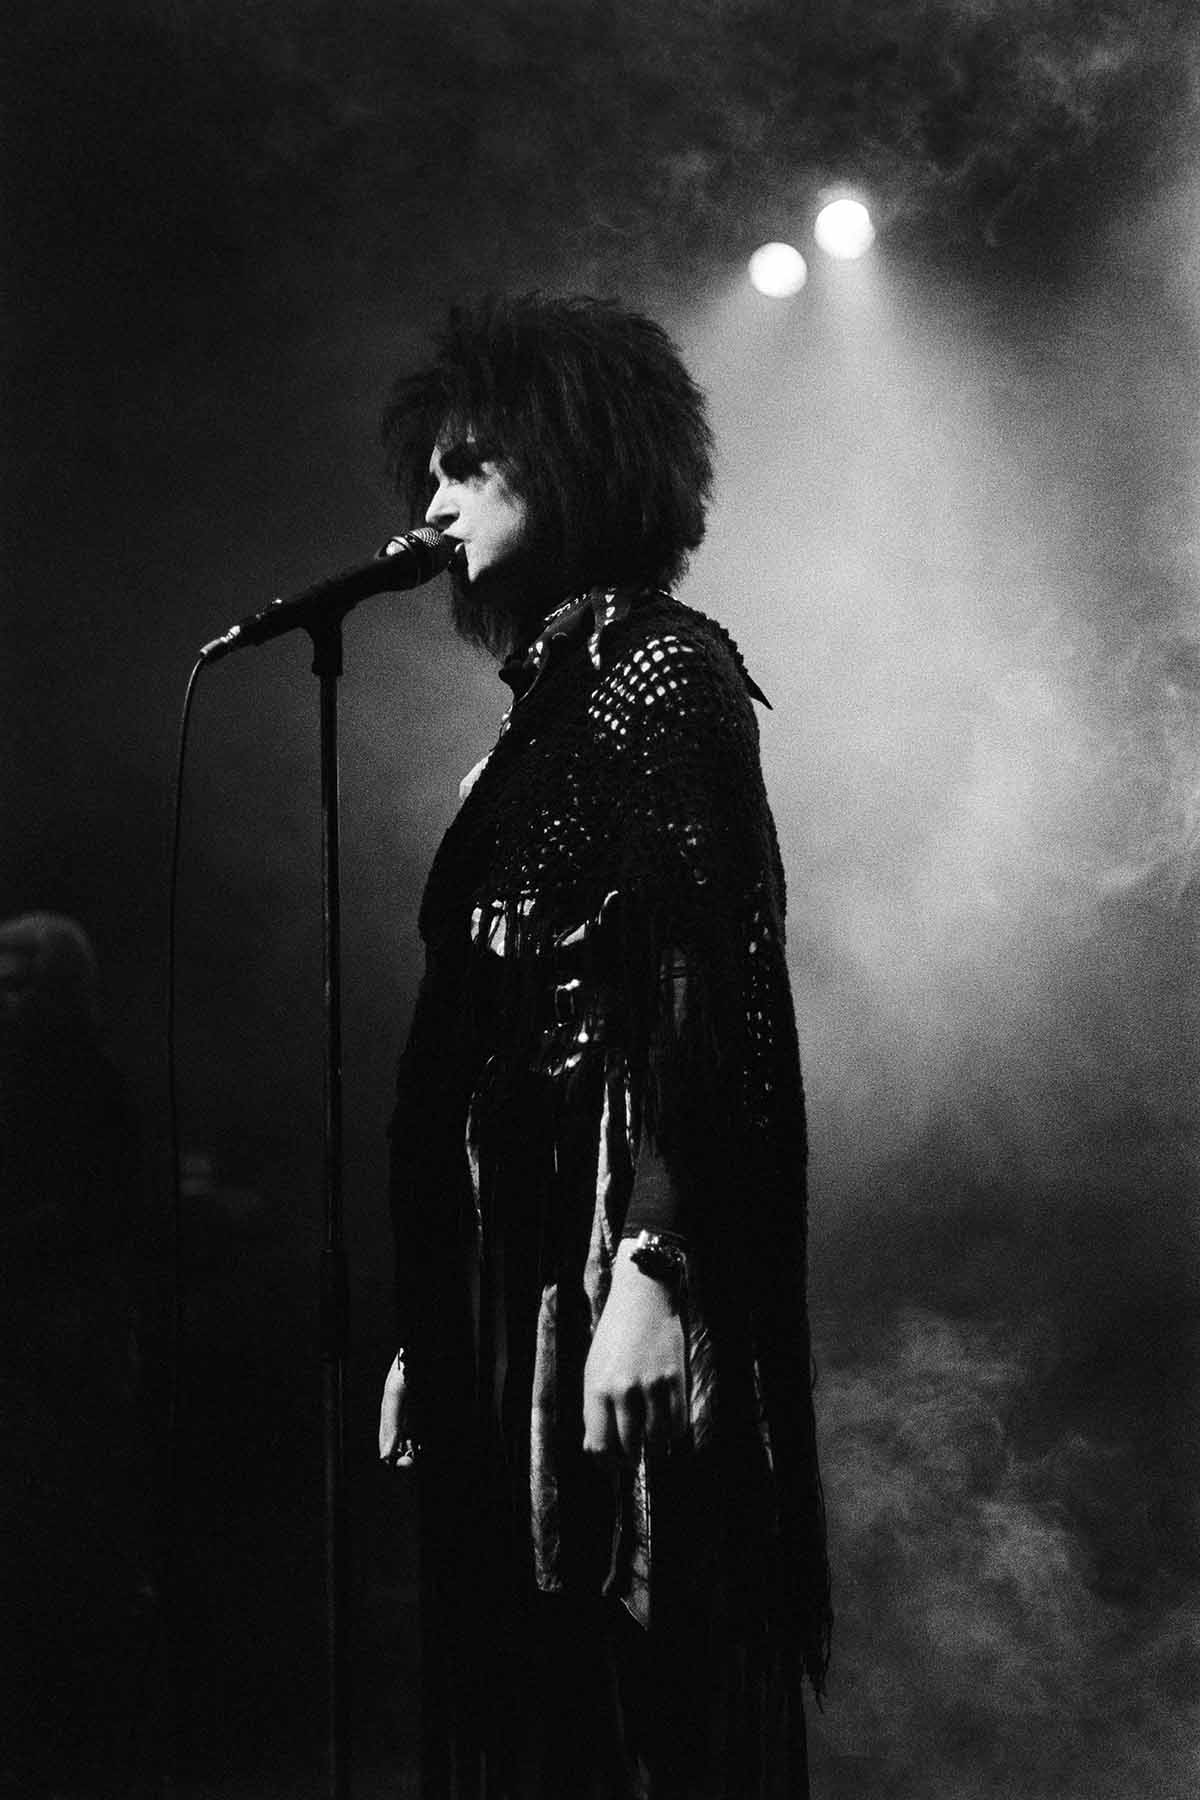 Live photos of experimental New Wave, Noise, Post-Punk, Industrial en Avantgarde bands inge-bekkers-photography-siouxsie-and-the-banshees-pandora-music-box-1983-live-alternative-bands-0317-fotografie